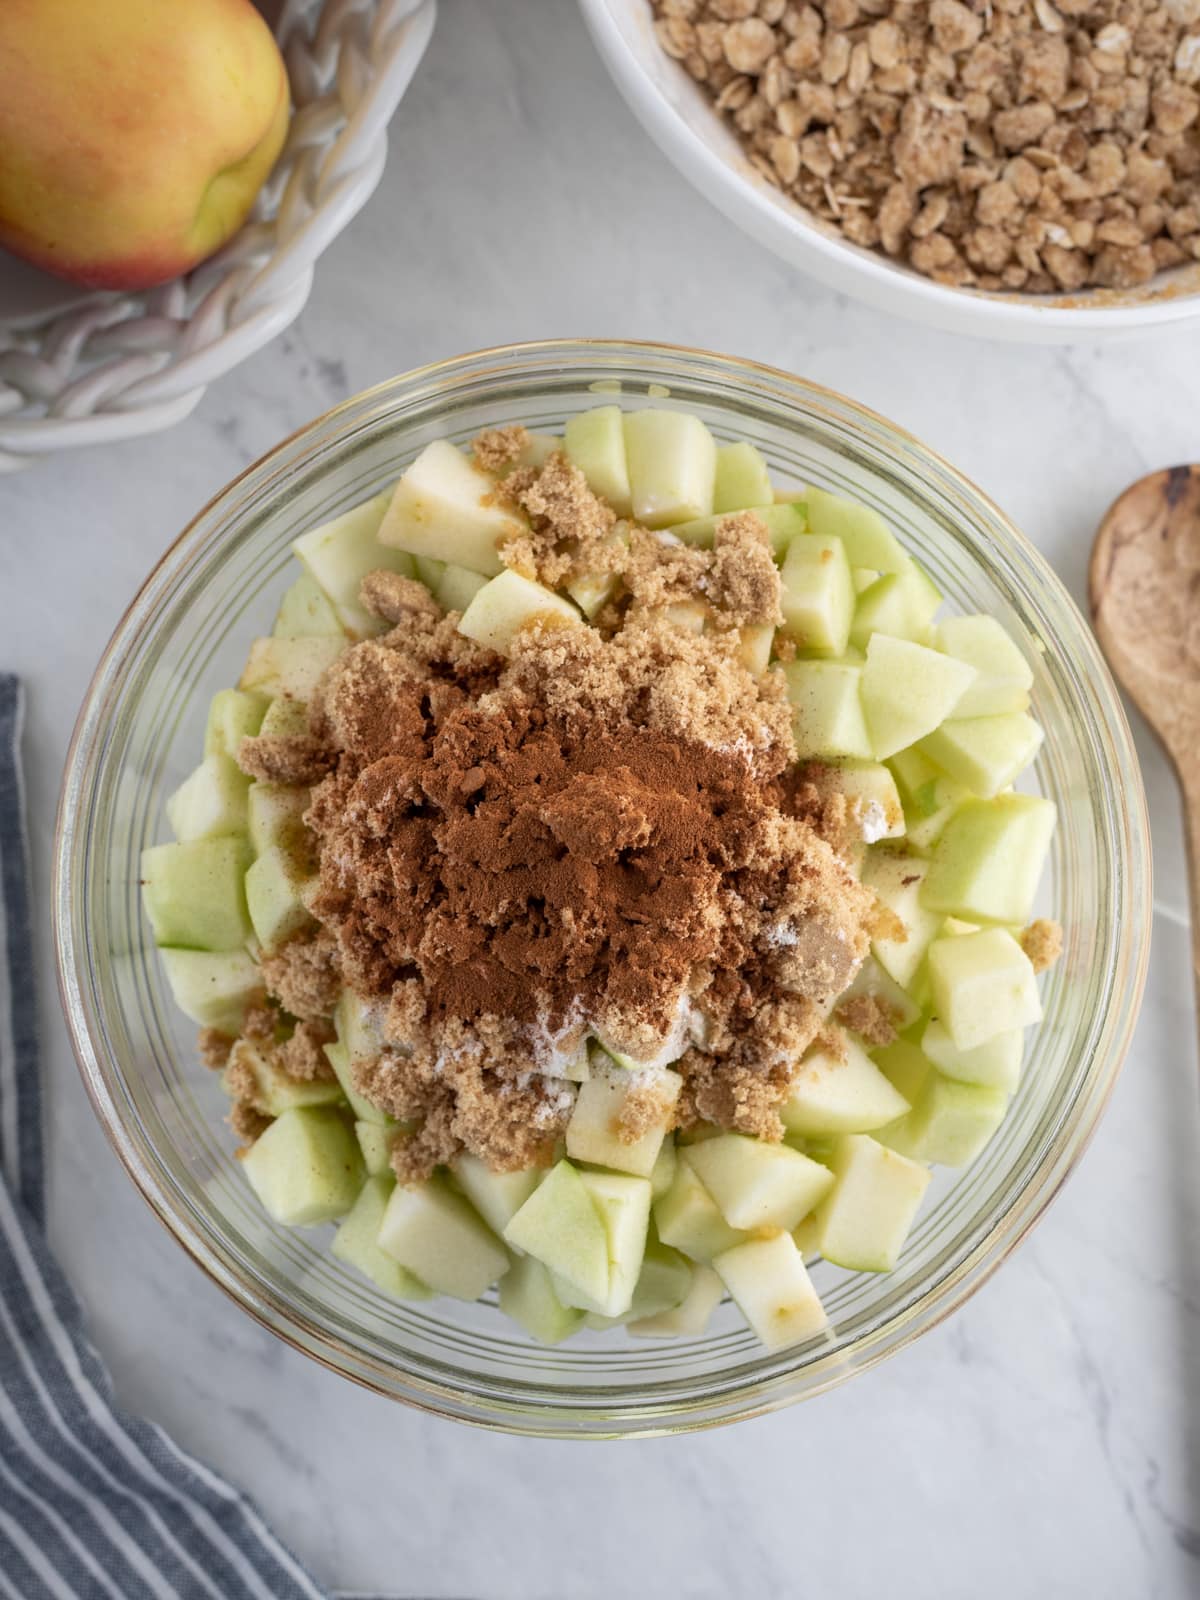 Bowlful of diced granny smith apples with cinnamon spice on top.